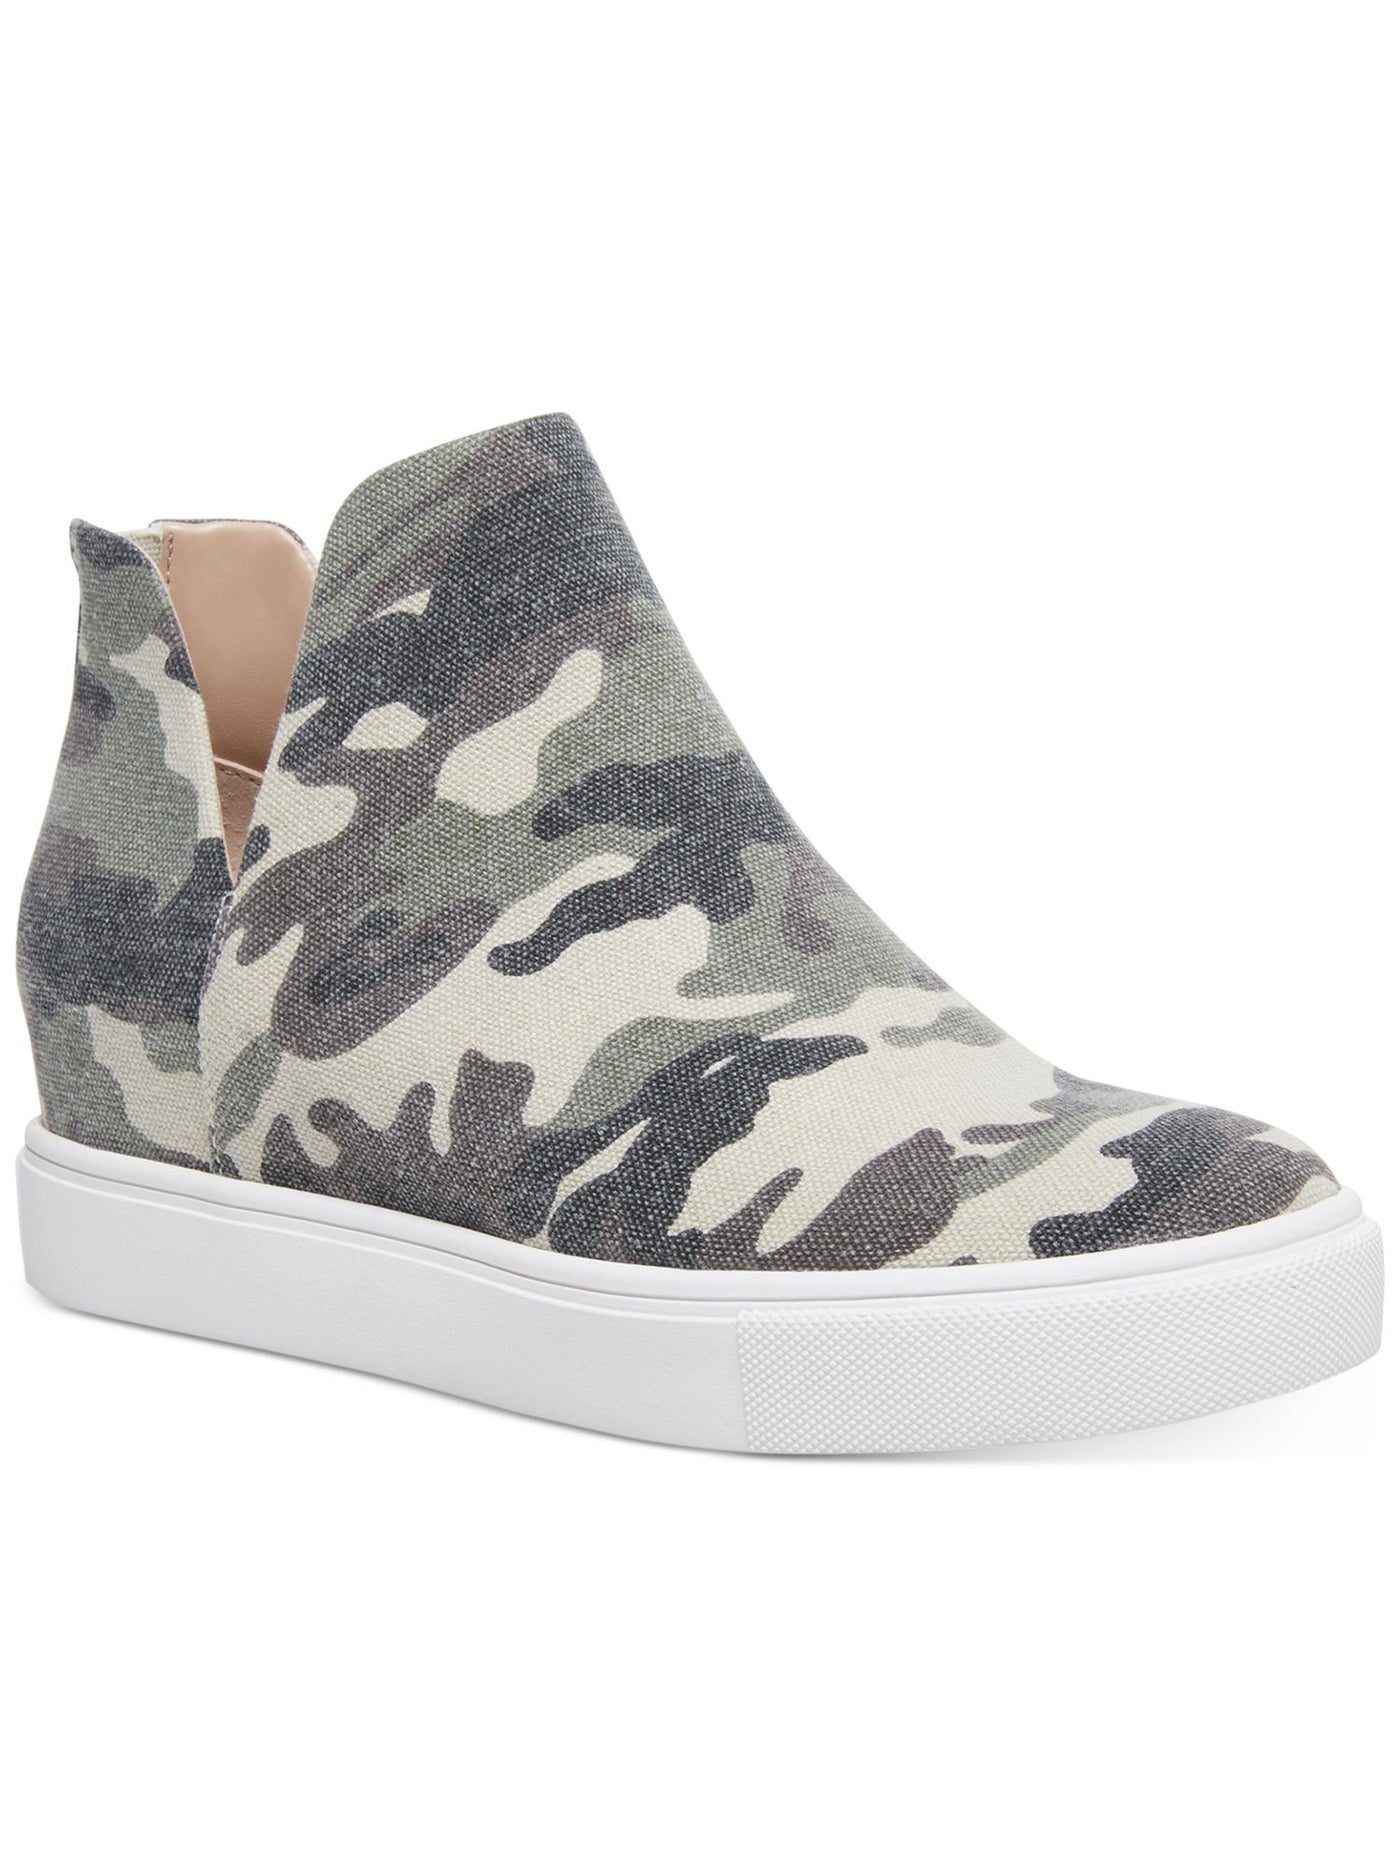 STEVE MADDEN Womens Green Camouflage V-Notch Cutouts Hidden Heel Georgie Round Toe Wedge Zip-Up Athletic Sneakers Shoes 5.5 M